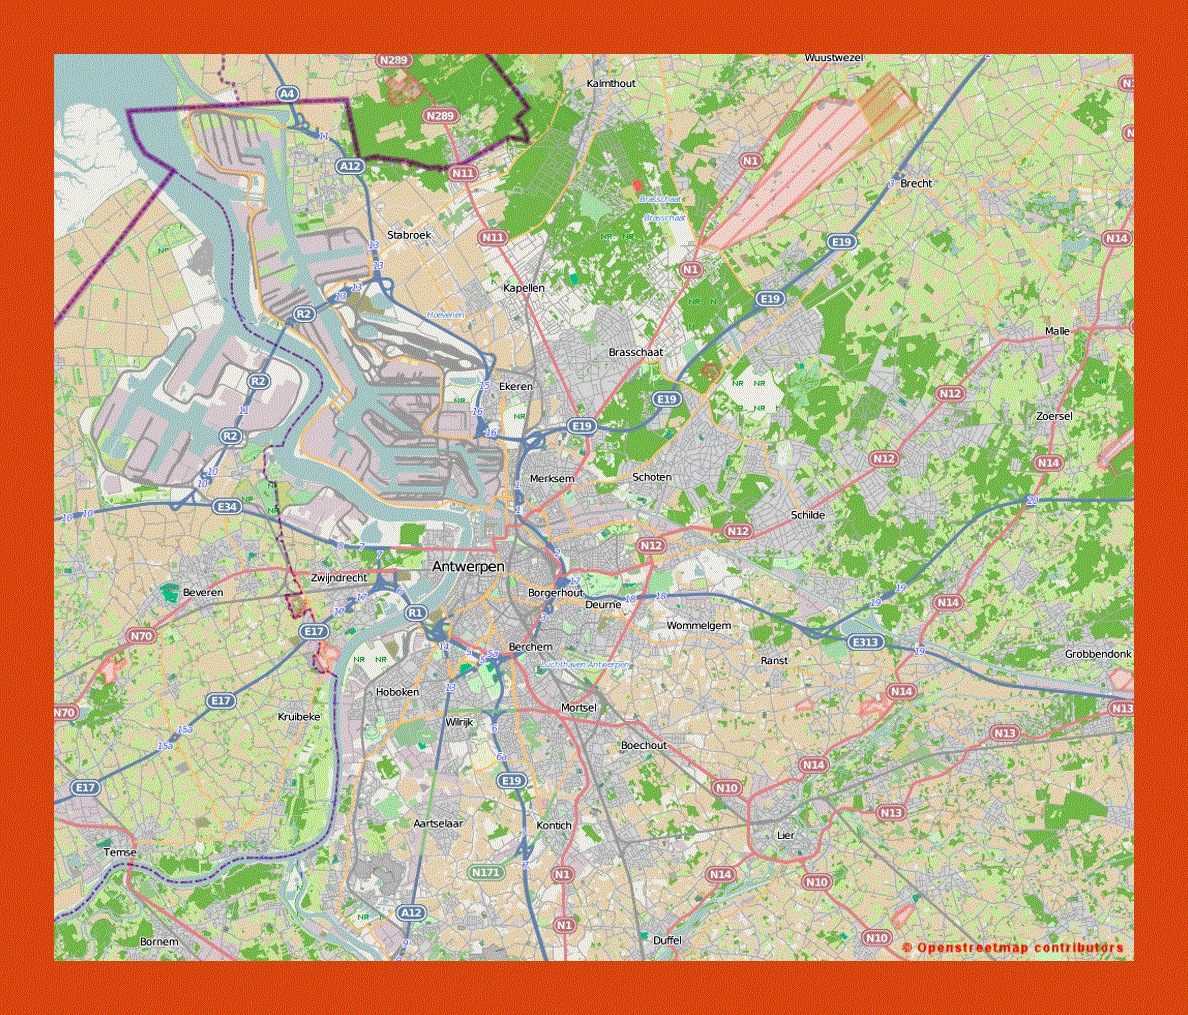 Road map of Antwerp and the surrounding area